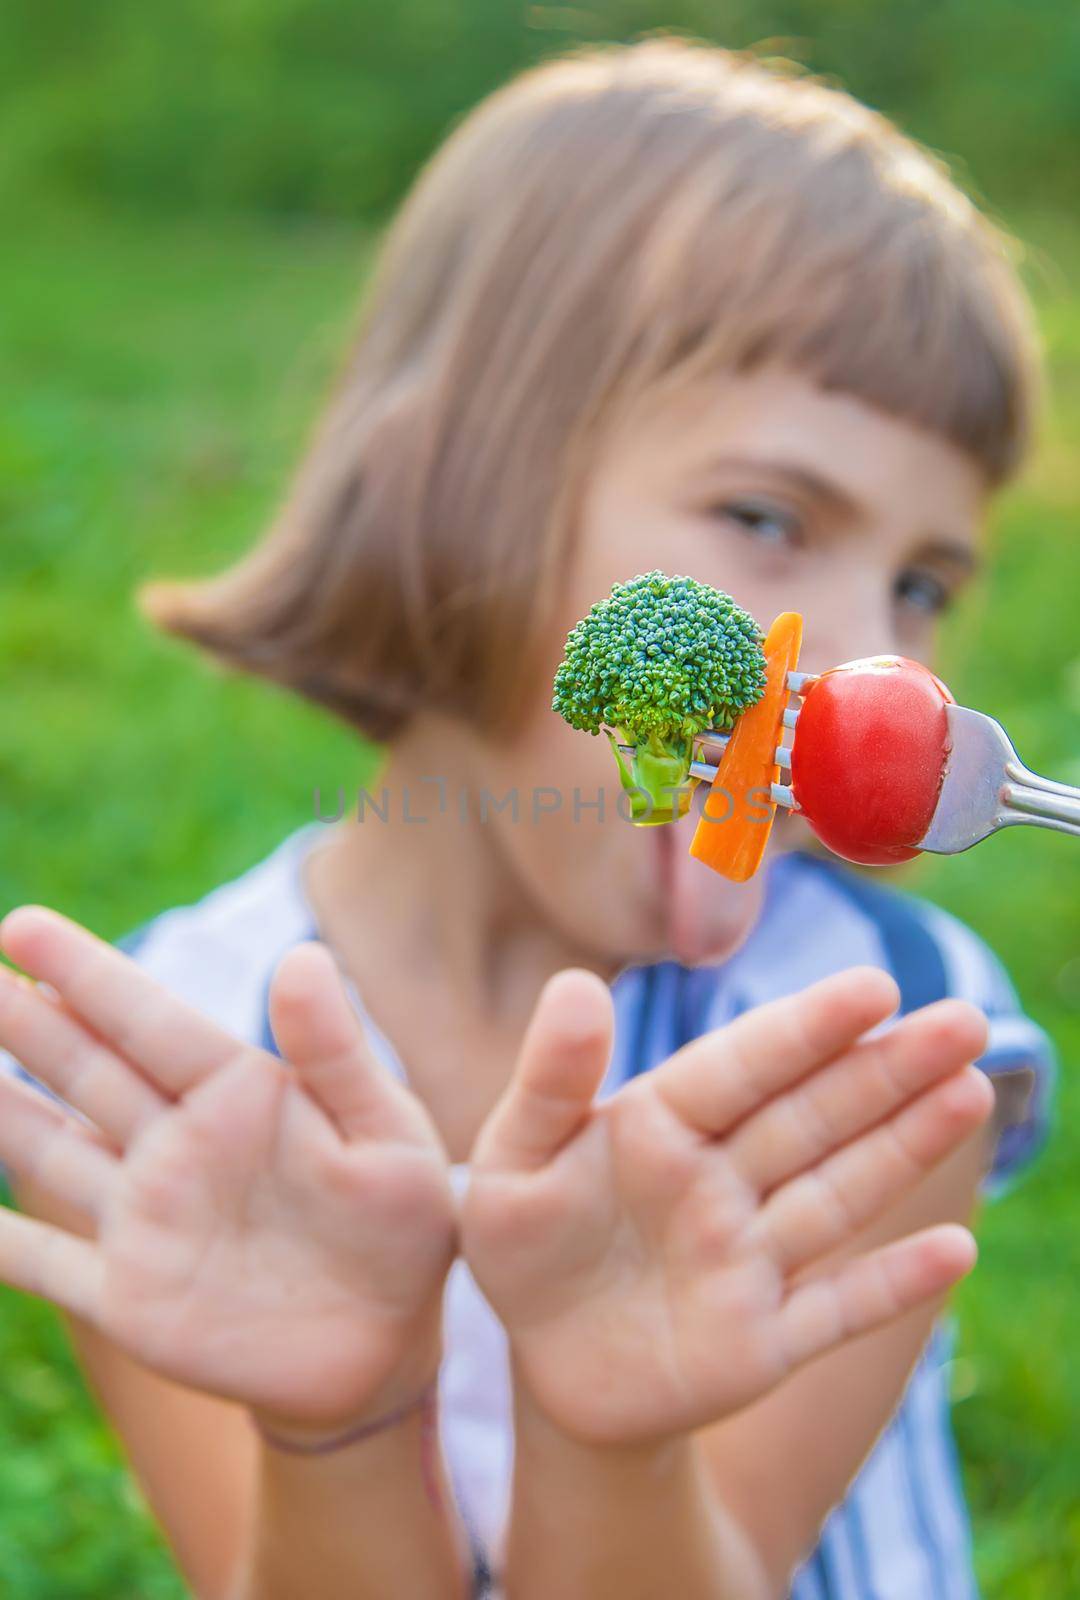 child eats vegetables broccoli and carrots. Selective focus.